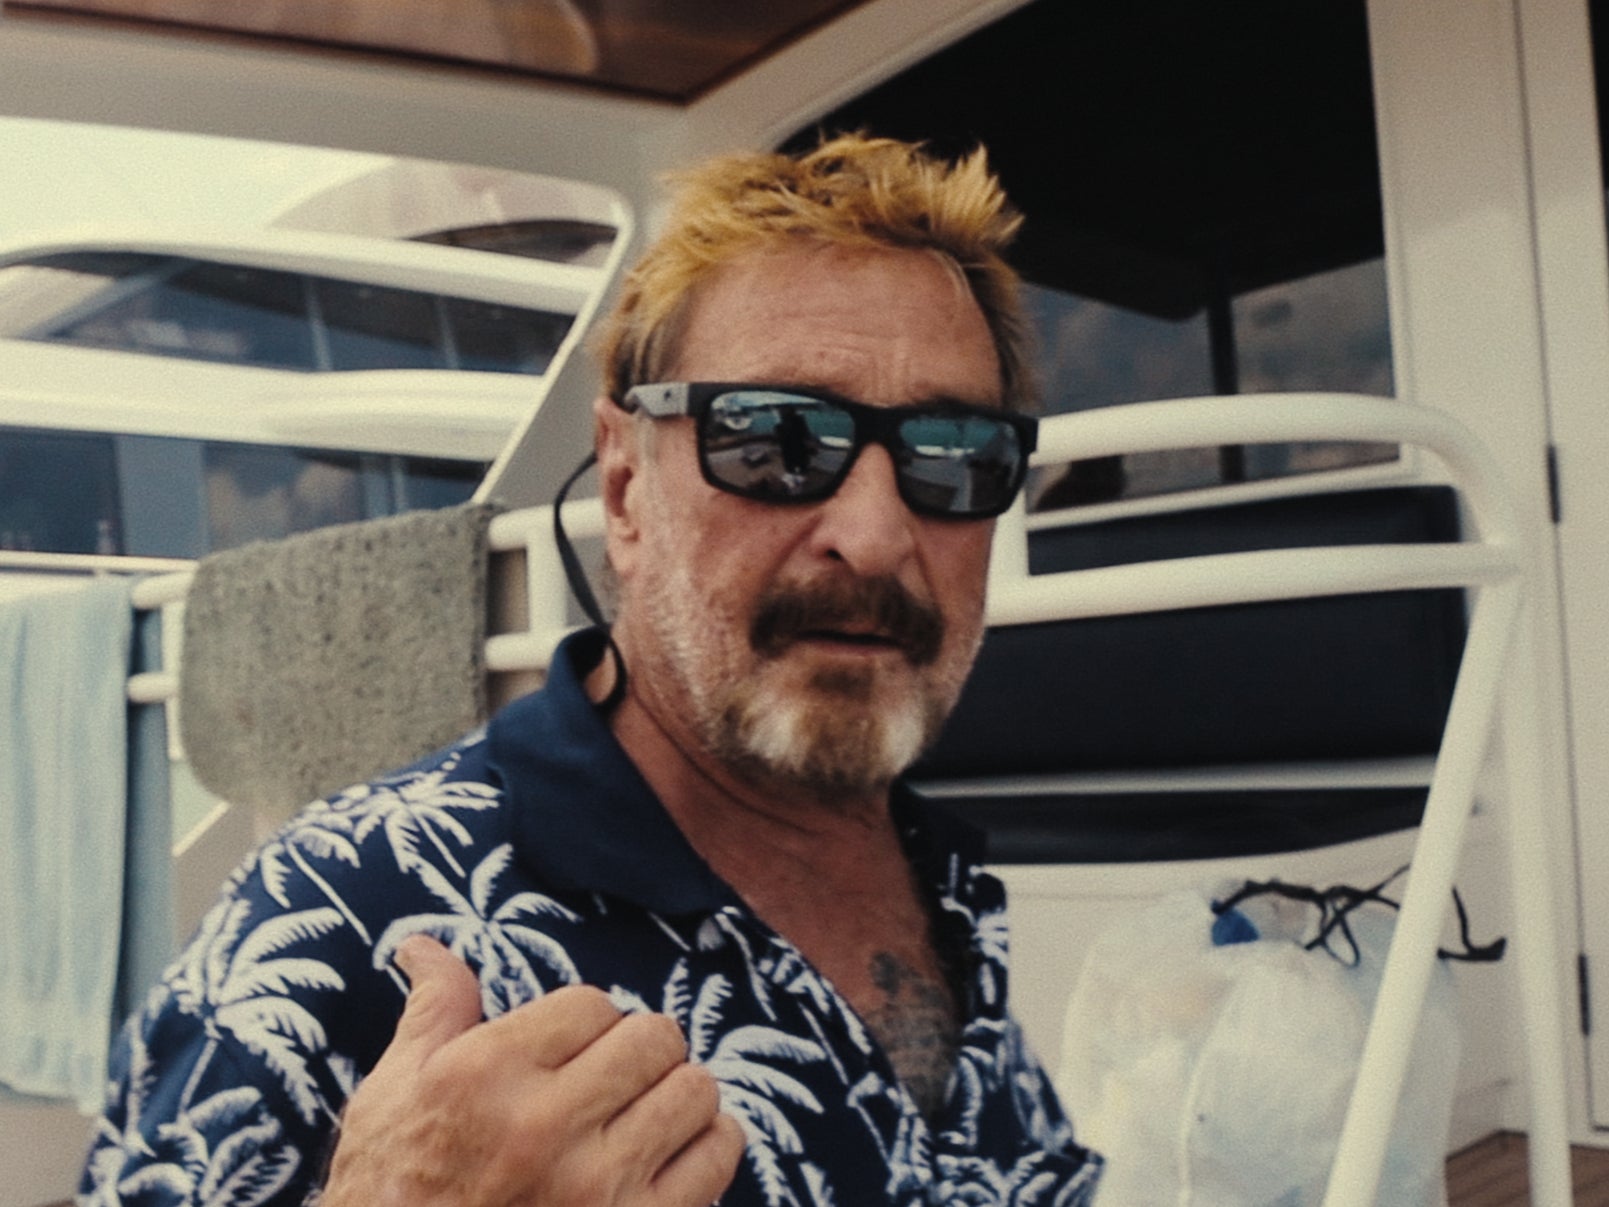 Running with the Devil: The Wild World of John McAfee. John McAfee in Running with the Devil: The Wild World of John McAfee. Cr. Courtesy of Netflix © 2022